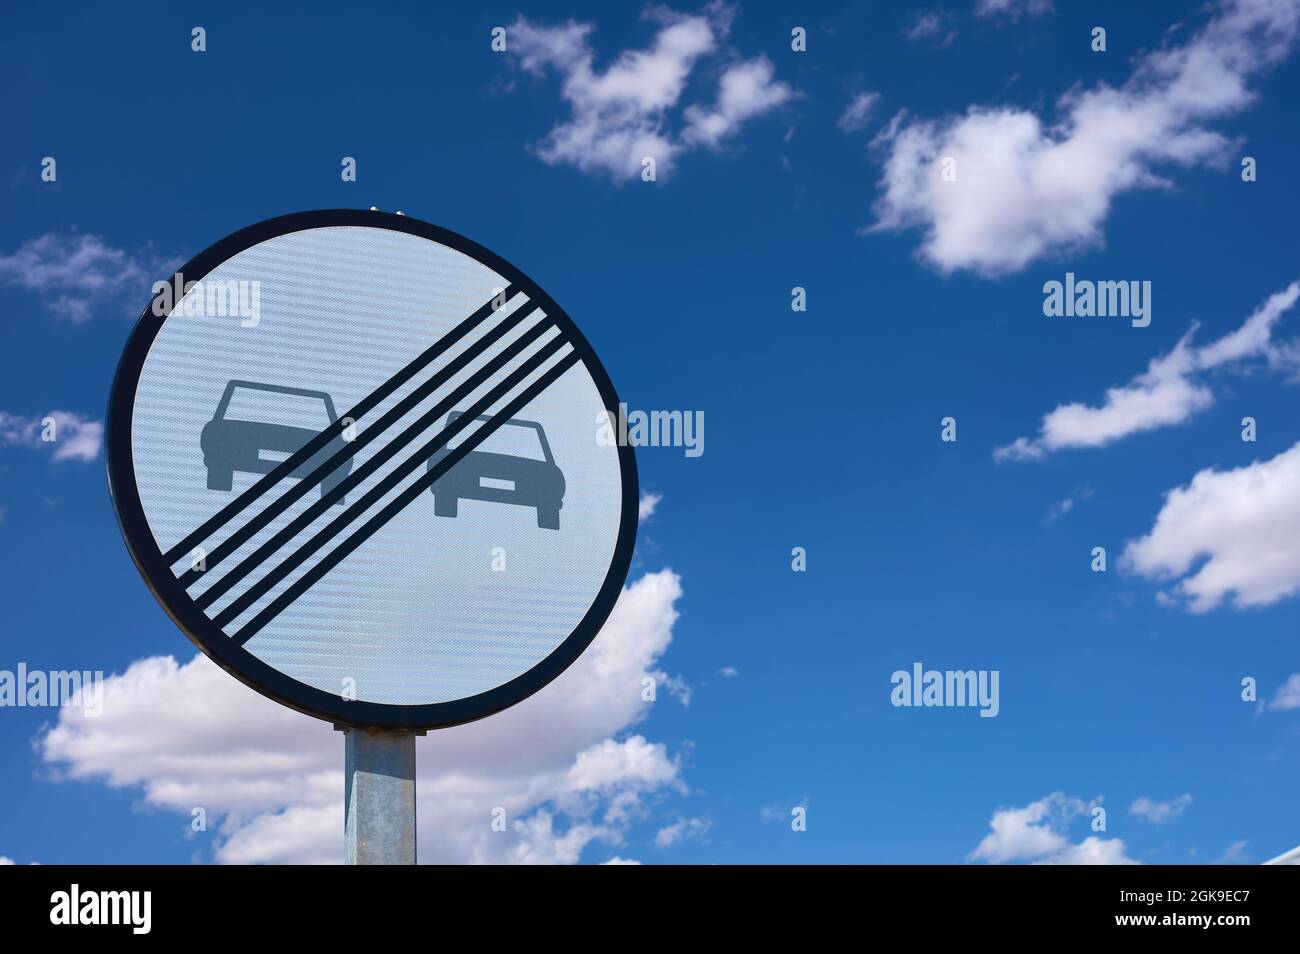 detail of a traffic sign indicating the end of the no passing sign Stock Photo